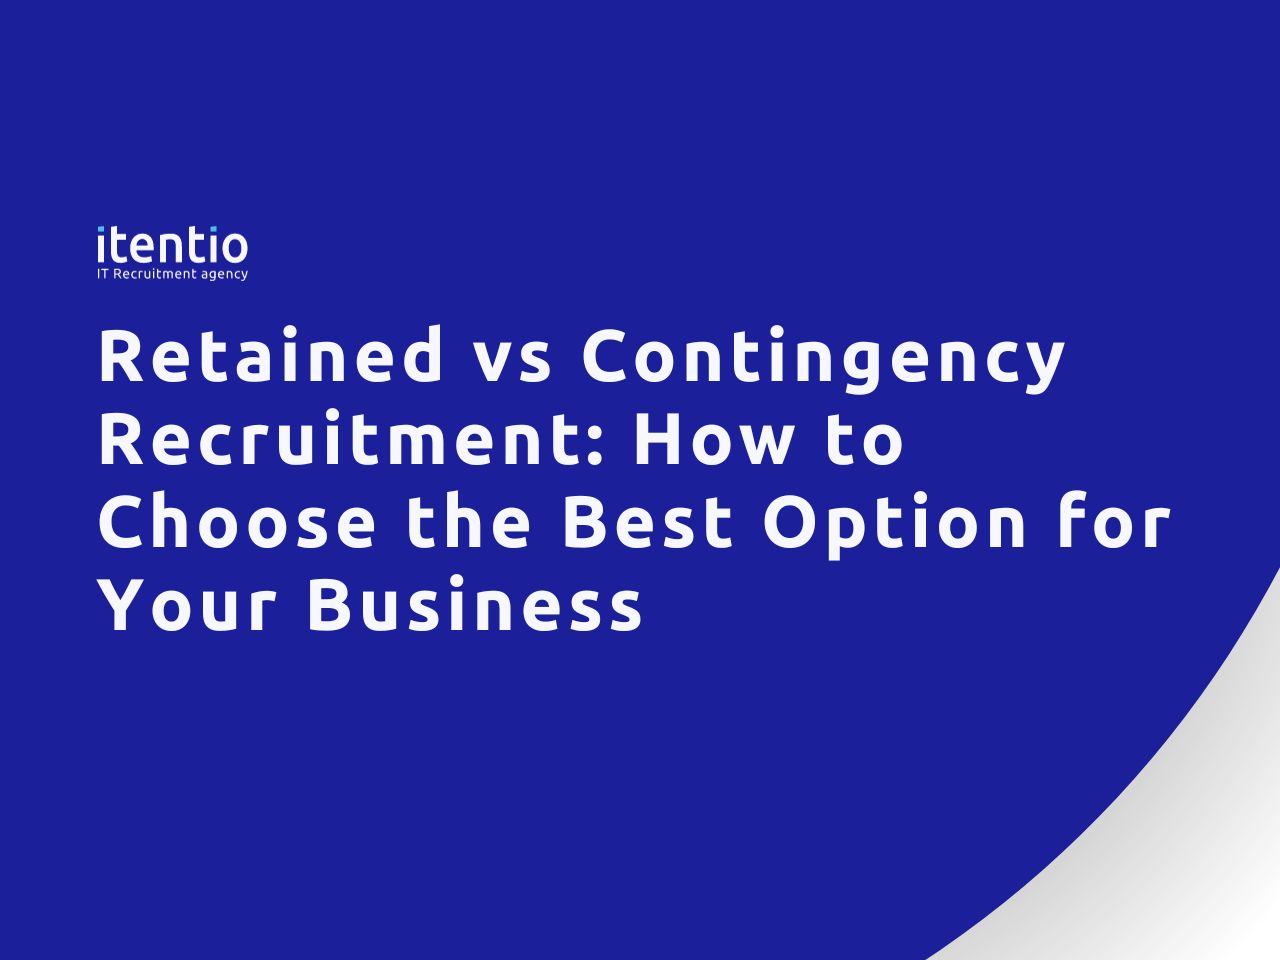 Retained vs Contingency Recruitment: Which is Best for Your Business?